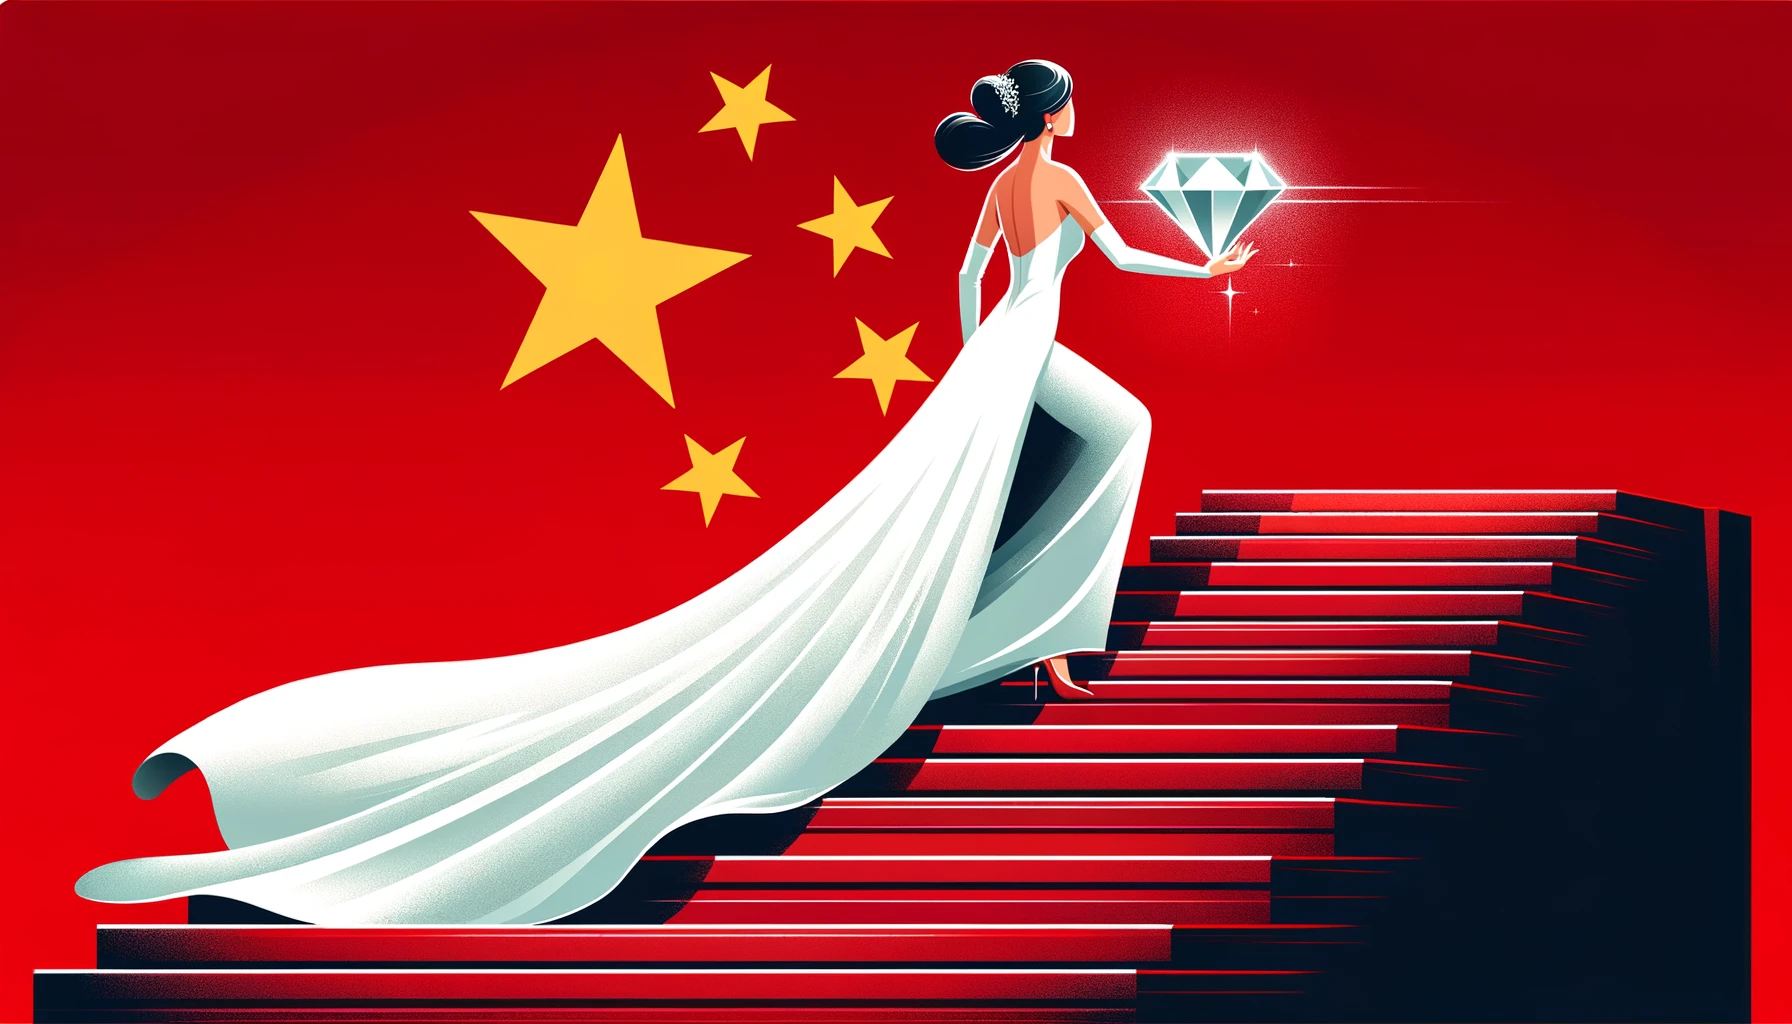 China'S Diamond Slump Conceptualized By An Image Of A Chinese Bride Climbing Upward To A Goal Of A Large Diamond. The Chinese Flag Serves As A Backdrop.